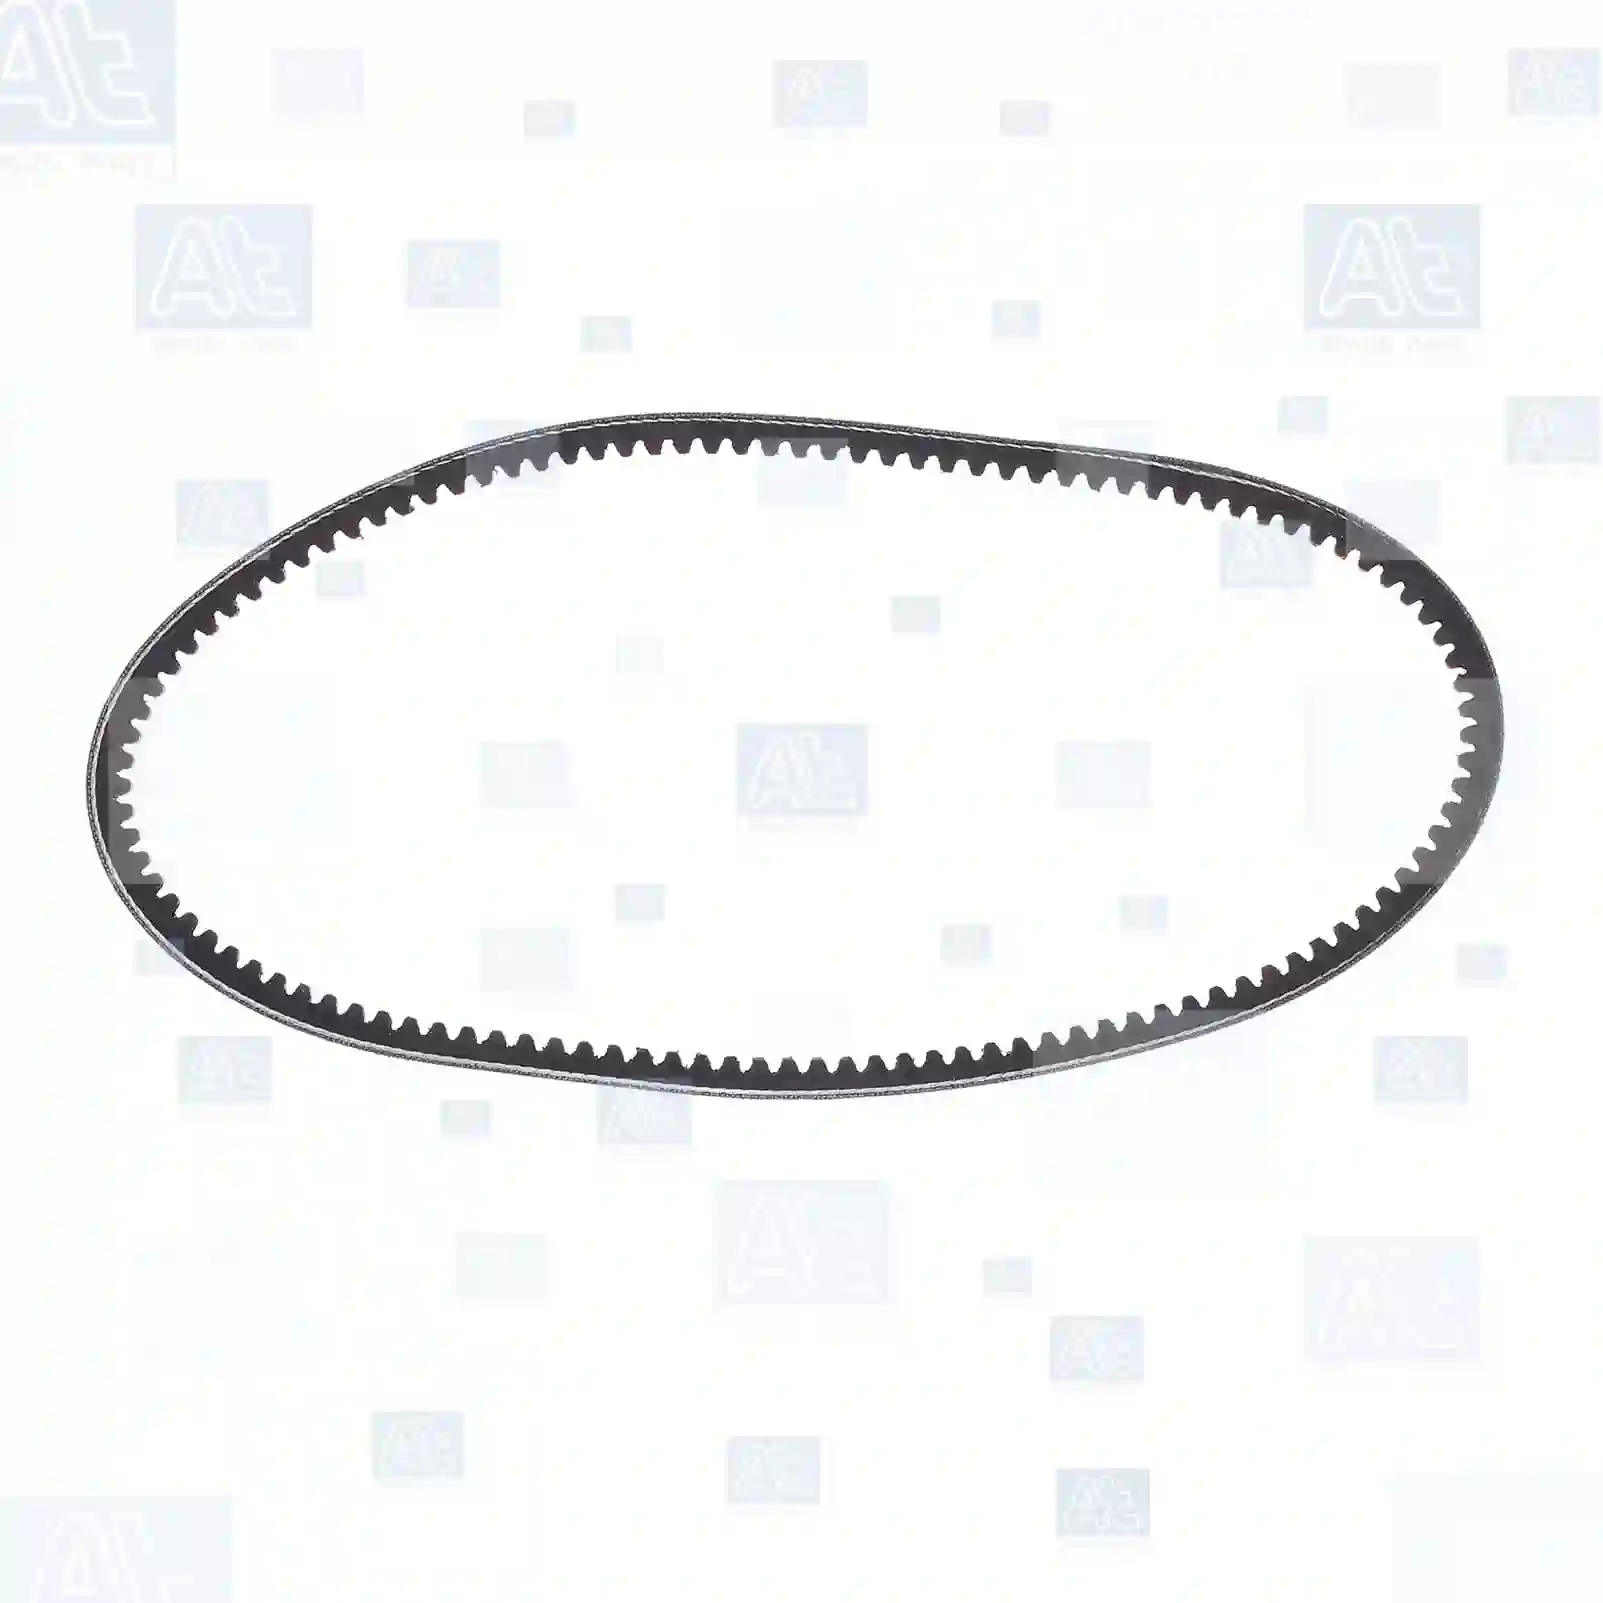 V-belt, at no 77708293, oem no: 07574198, 164035011, 10200210300, 105140210300, 60504835, 60800098, 13H4706, AEJ63, GFB121, 6137573, 04827116, 4827116, 007753009504, 13H4706, AEJ63, 13H4706, AEJ63, GFB121, GFB253, GFB60838, 4021308020, 903352, 204E8620B, 0855676100, 5000783655, 5001014846, 7700503052, 7700557552, 7700580482, 7700624262, 7700648156, 7701348229, AEJ63, 17521-83010, 17521-B8201, 71802863, 99321-00840, 99321-00860, 99521-10843, 13H4706, 13H8673, AEJ101, AEJ63, GCB10838, GFB10838, GFB121, GFB197, GFB210, GFB253, GFB60838, 950352, 951684, 966902, 966903, 973535, 977759, 068121039L, ZG02354-0008 At Spare Part | Engine, Accelerator Pedal, Camshaft, Connecting Rod, Crankcase, Crankshaft, Cylinder Head, Engine Suspension Mountings, Exhaust Manifold, Exhaust Gas Recirculation, Filter Kits, Flywheel Housing, General Overhaul Kits, Engine, Intake Manifold, Oil Cleaner, Oil Cooler, Oil Filter, Oil Pump, Oil Sump, Piston & Liner, Sensor & Switch, Timing Case, Turbocharger, Cooling System, Belt Tensioner, Coolant Filter, Coolant Pipe, Corrosion Prevention Agent, Drive, Expansion Tank, Fan, Intercooler, Monitors & Gauges, Radiator, Thermostat, V-Belt / Timing belt, Water Pump, Fuel System, Electronical Injector Unit, Feed Pump, Fuel Filter, cpl., Fuel Gauge Sender,  Fuel Line, Fuel Pump, Fuel Tank, Injection Line Kit, Injection Pump, Exhaust System, Clutch & Pedal, Gearbox, Propeller Shaft, Axles, Brake System, Hubs & Wheels, Suspension, Leaf Spring, Universal Parts / Accessories, Steering, Electrical System, Cabin V-belt, at no 77708293, oem no: 07574198, 164035011, 10200210300, 105140210300, 60504835, 60800098, 13H4706, AEJ63, GFB121, 6137573, 04827116, 4827116, 007753009504, 13H4706, AEJ63, 13H4706, AEJ63, GFB121, GFB253, GFB60838, 4021308020, 903352, 204E8620B, 0855676100, 5000783655, 5001014846, 7700503052, 7700557552, 7700580482, 7700624262, 7700648156, 7701348229, AEJ63, 17521-83010, 17521-B8201, 71802863, 99321-00840, 99321-00860, 99521-10843, 13H4706, 13H8673, AEJ101, AEJ63, GCB10838, GFB10838, GFB121, GFB197, GFB210, GFB253, GFB60838, 950352, 951684, 966902, 966903, 973535, 977759, 068121039L, ZG02354-0008 At Spare Part | Engine, Accelerator Pedal, Camshaft, Connecting Rod, Crankcase, Crankshaft, Cylinder Head, Engine Suspension Mountings, Exhaust Manifold, Exhaust Gas Recirculation, Filter Kits, Flywheel Housing, General Overhaul Kits, Engine, Intake Manifold, Oil Cleaner, Oil Cooler, Oil Filter, Oil Pump, Oil Sump, Piston & Liner, Sensor & Switch, Timing Case, Turbocharger, Cooling System, Belt Tensioner, Coolant Filter, Coolant Pipe, Corrosion Prevention Agent, Drive, Expansion Tank, Fan, Intercooler, Monitors & Gauges, Radiator, Thermostat, V-Belt / Timing belt, Water Pump, Fuel System, Electronical Injector Unit, Feed Pump, Fuel Filter, cpl., Fuel Gauge Sender,  Fuel Line, Fuel Pump, Fuel Tank, Injection Line Kit, Injection Pump, Exhaust System, Clutch & Pedal, Gearbox, Propeller Shaft, Axles, Brake System, Hubs & Wheels, Suspension, Leaf Spring, Universal Parts / Accessories, Steering, Electrical System, Cabin